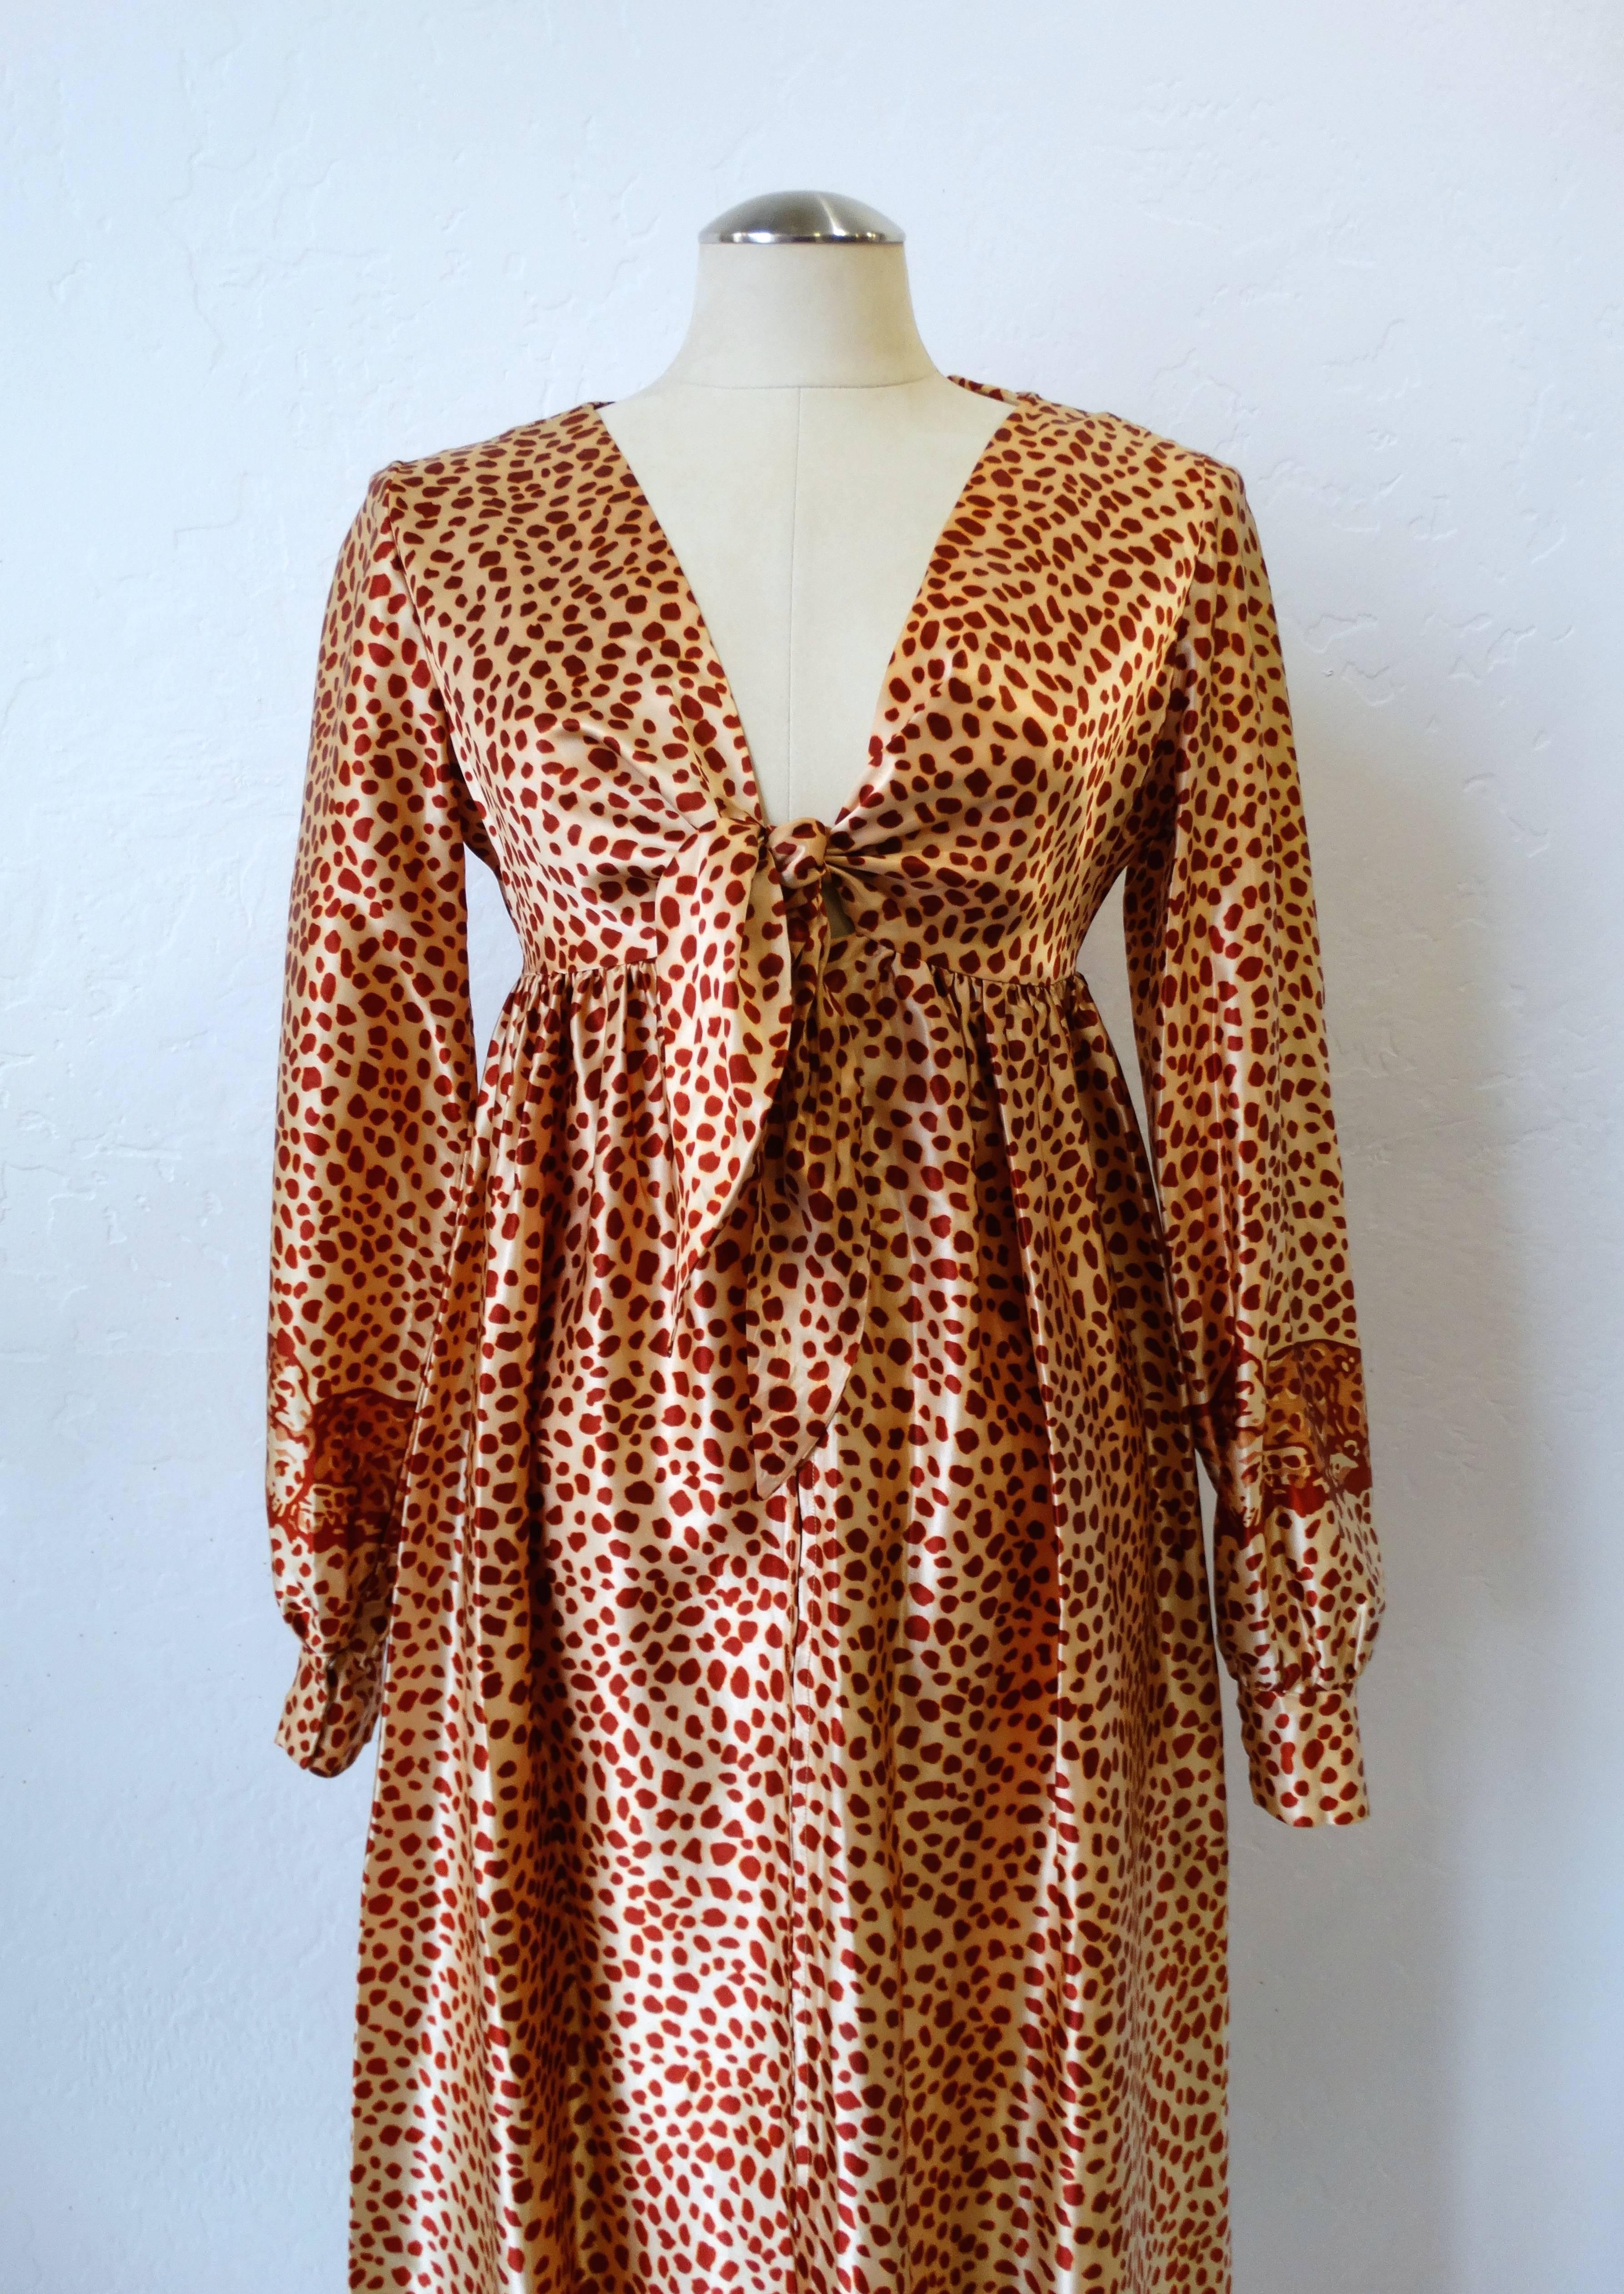 Take a walk on the wild side in our 1970s Saks Fifth Avenue leopard dress! Super silky satin printed with leopard dot print, accented with little leopards on the cuffs and hem. Sexy fit, v neckline with adjustable tie at the bust. Flattering long